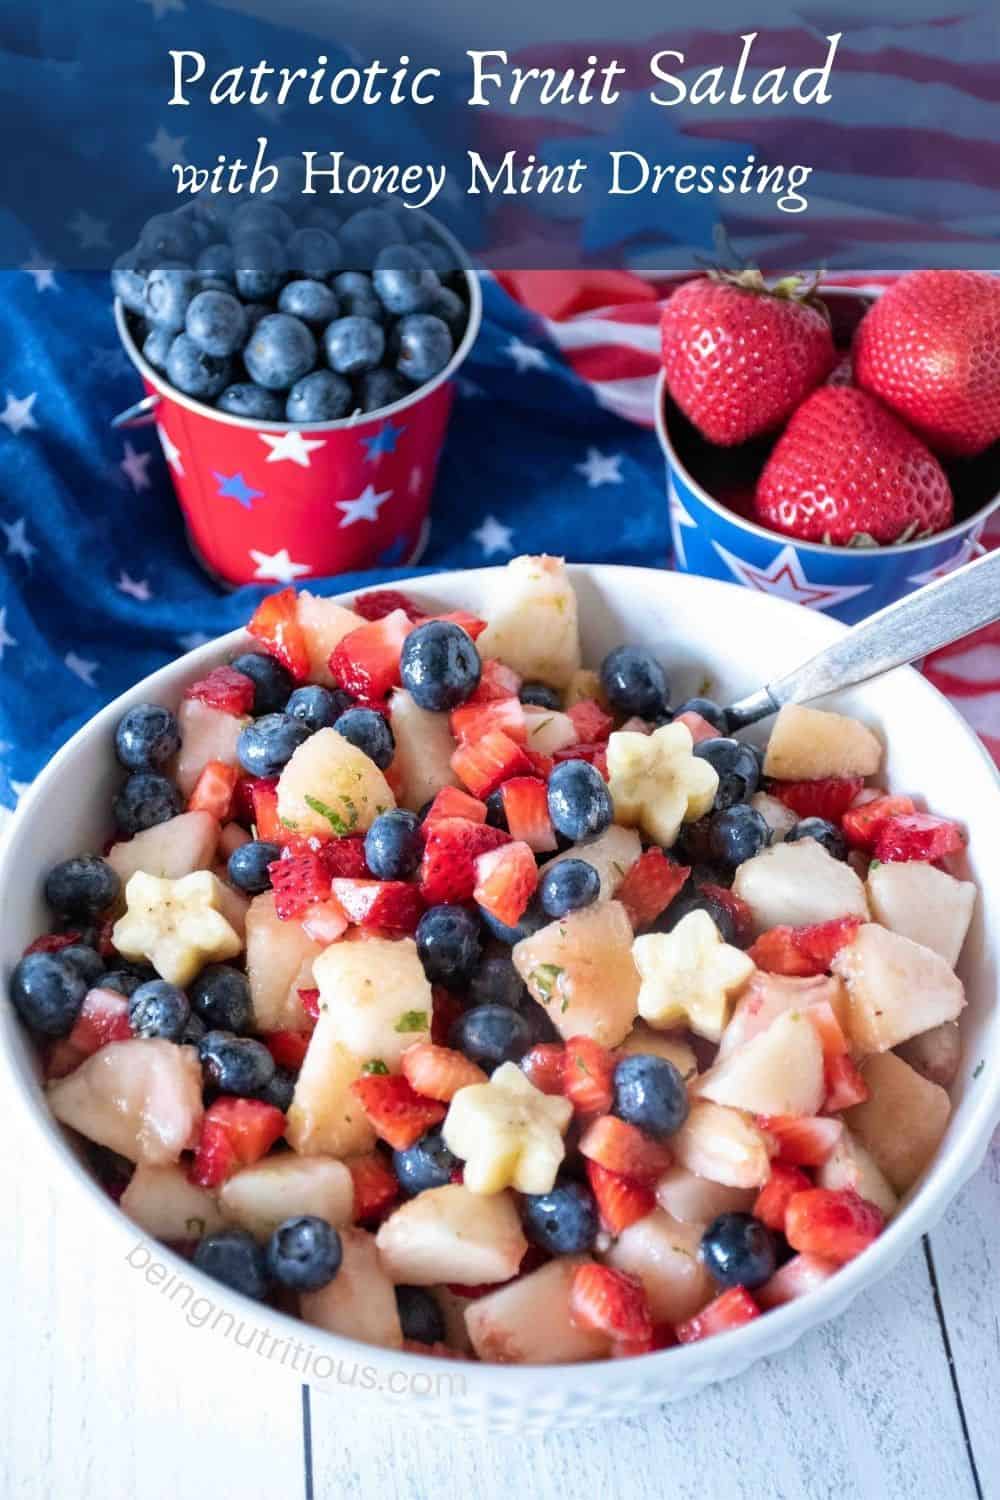 Bowl of red white and blue fruit salad. Text overlay: Patriotic Fruit Salad with Honey Mint Dressing.